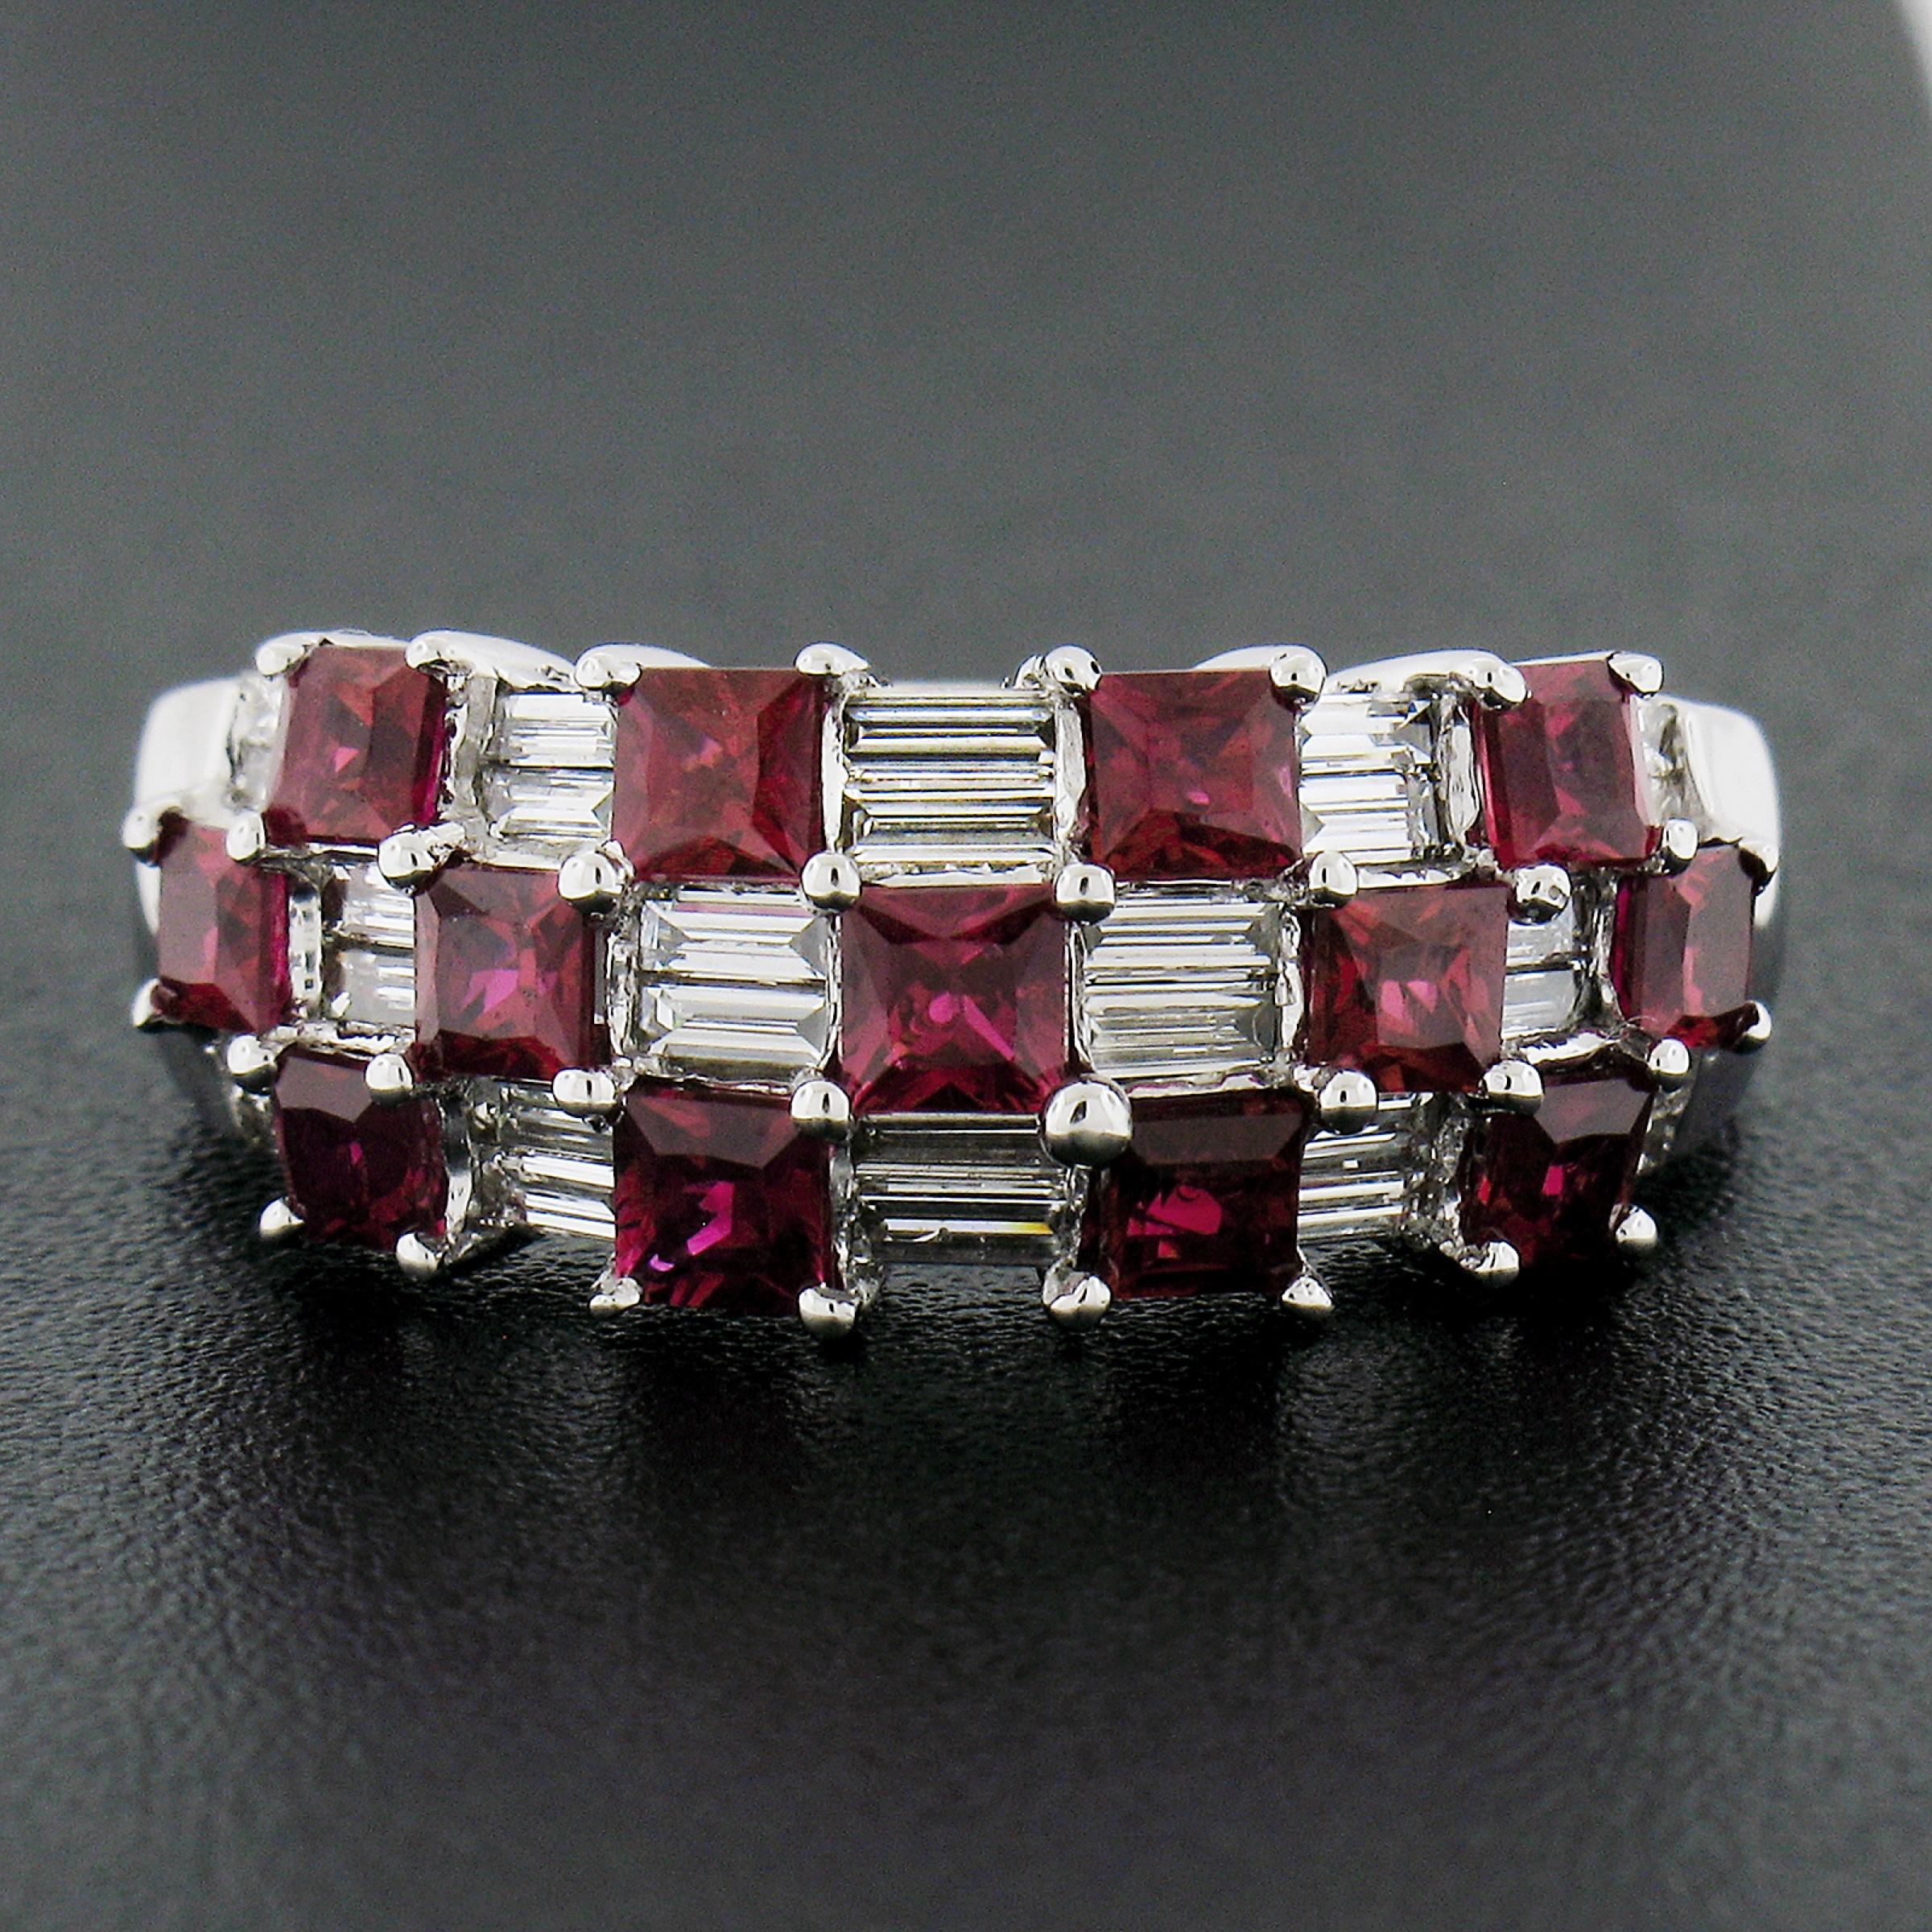 --Stone(s):--
(13) Natural Genuine Rubies - Square Faceted Cut - Prong Set - Vivid Slightly Purplish Red Color w/ Natural Inclusions - 2.0ctw (approx.)
(28) Natural Genuine Diamonds - Straight Baguette Cut - Prong Set - F/G Color - VS1/VS2 Clarity -